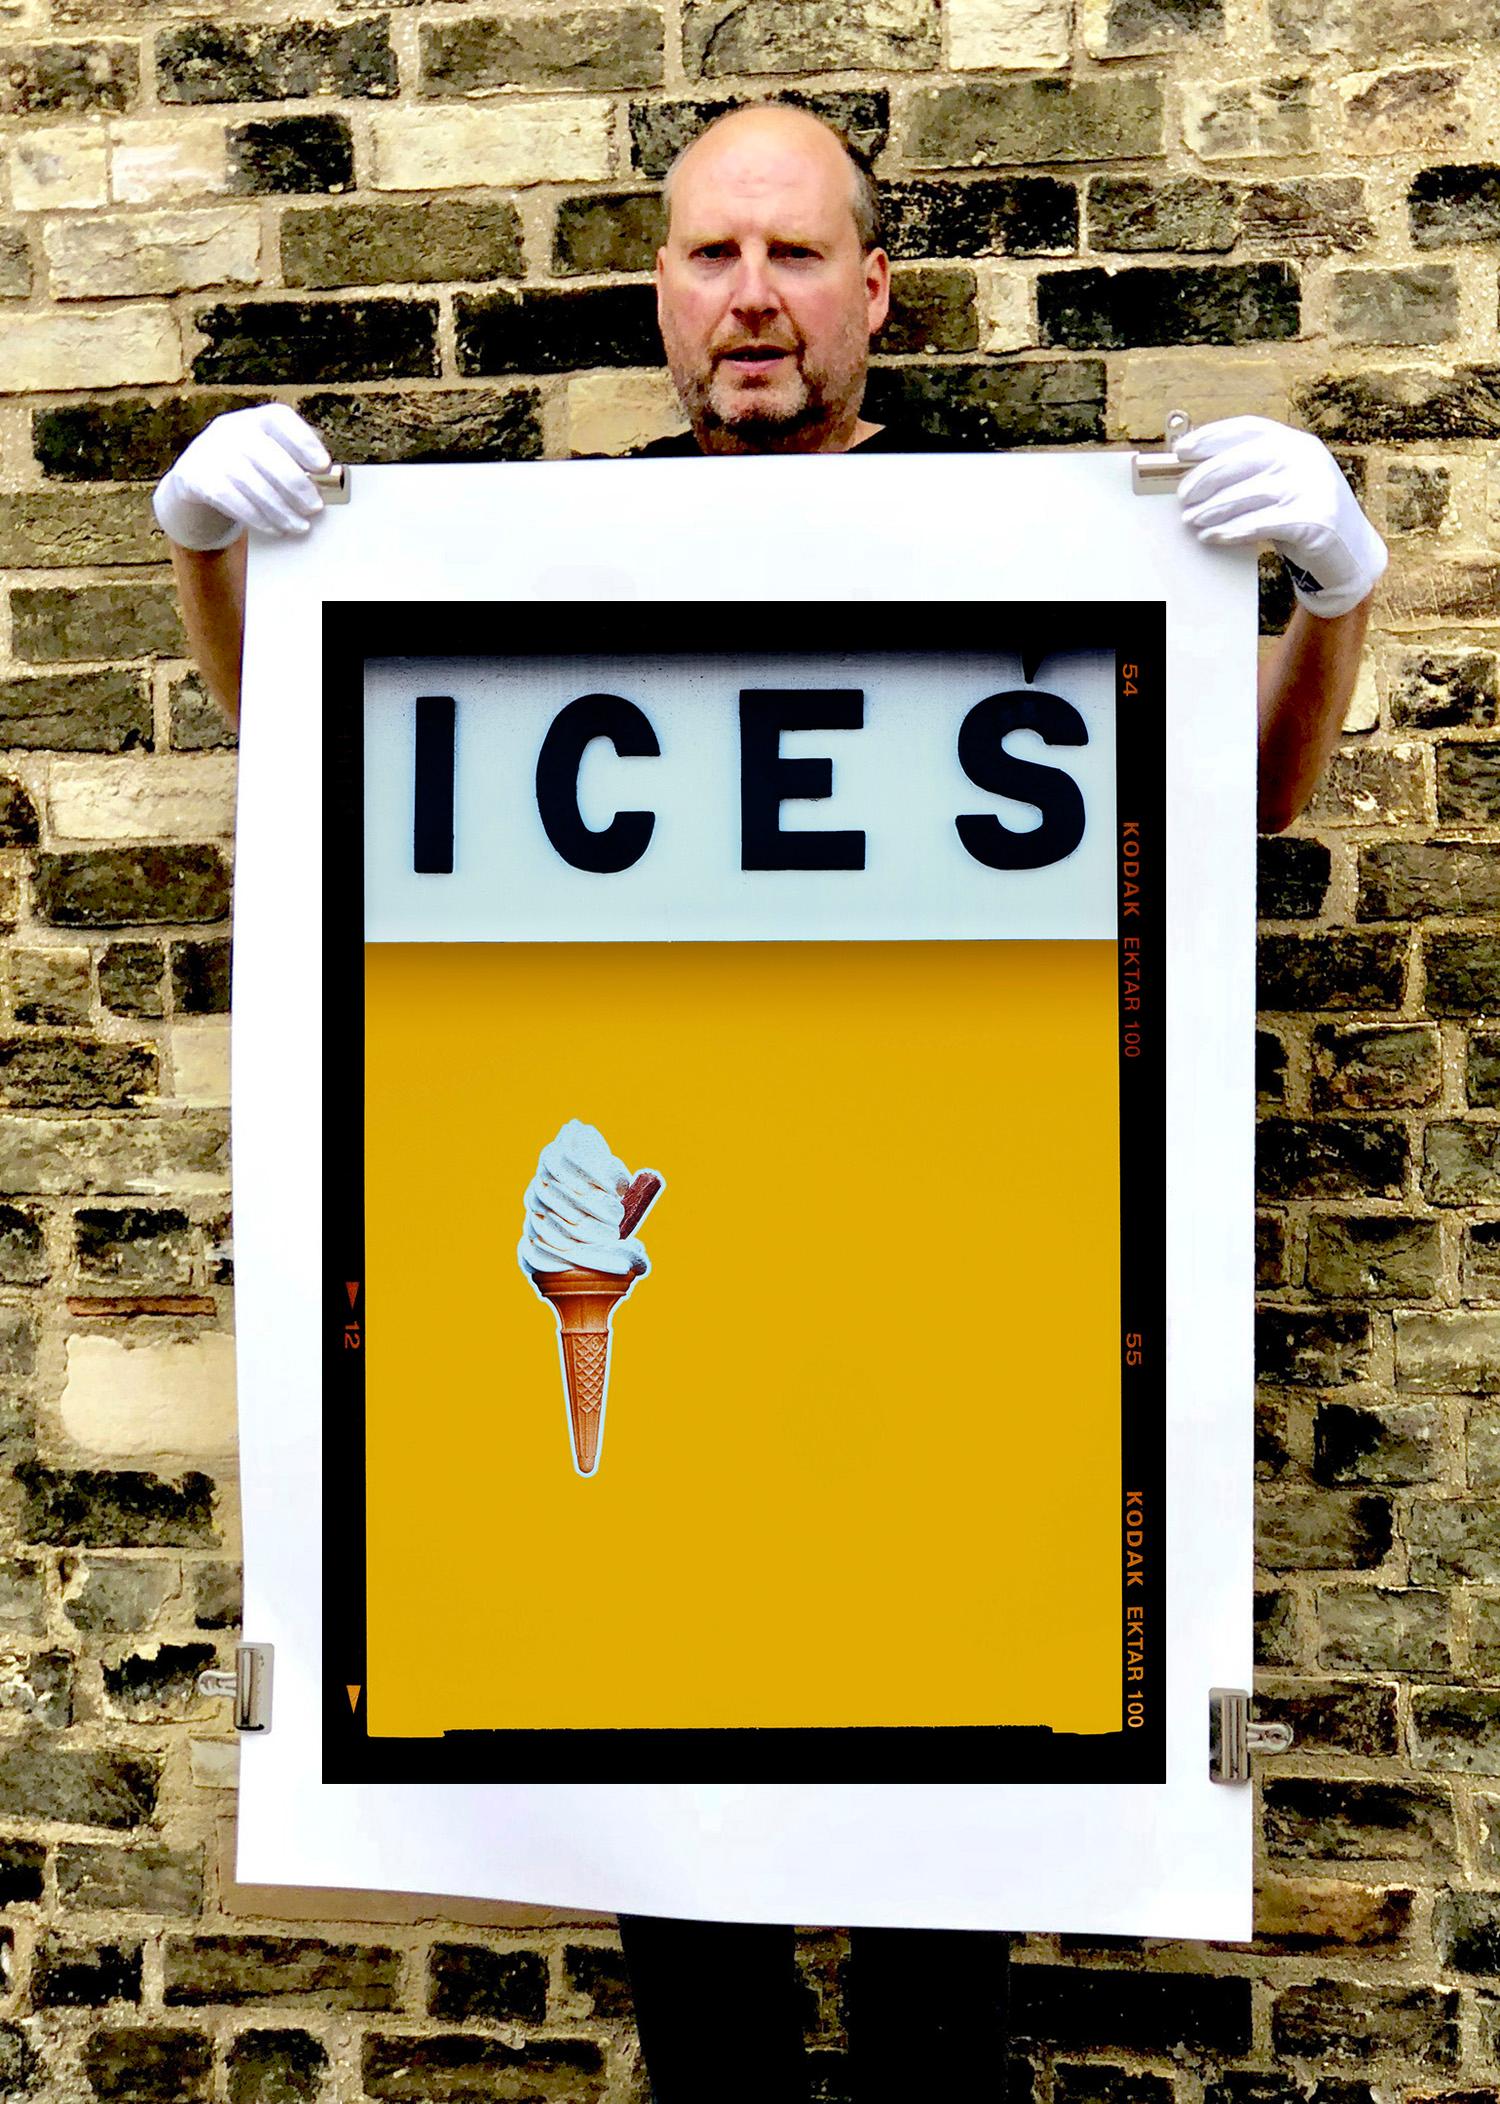 Ices (Mustard), Bexhill-on-Sea - British pop art color photography - Print by Richard Heeps